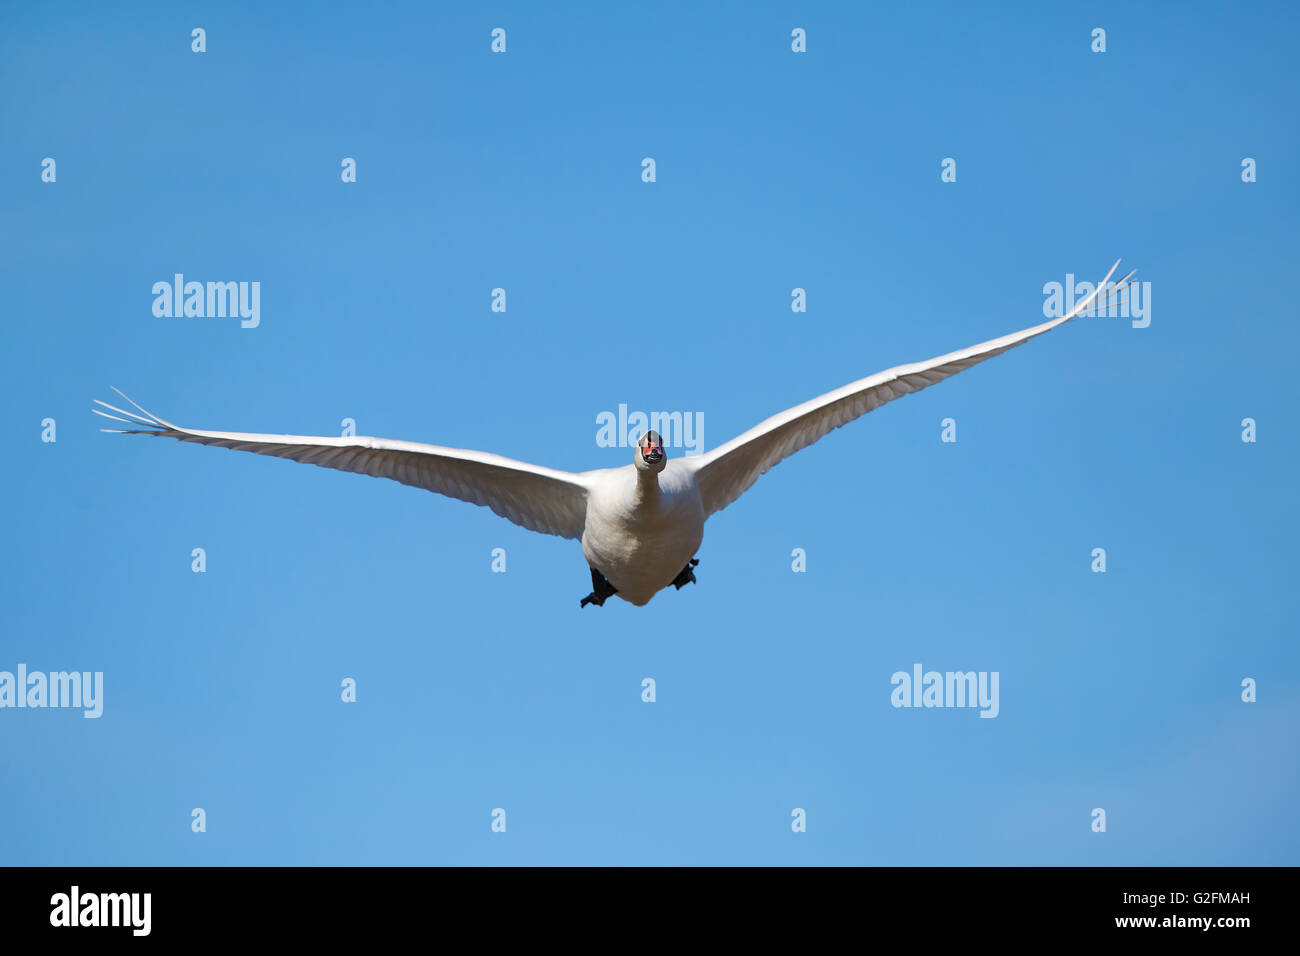 Mute swan in flight seen from the front with blue skies in the background Stock Photo